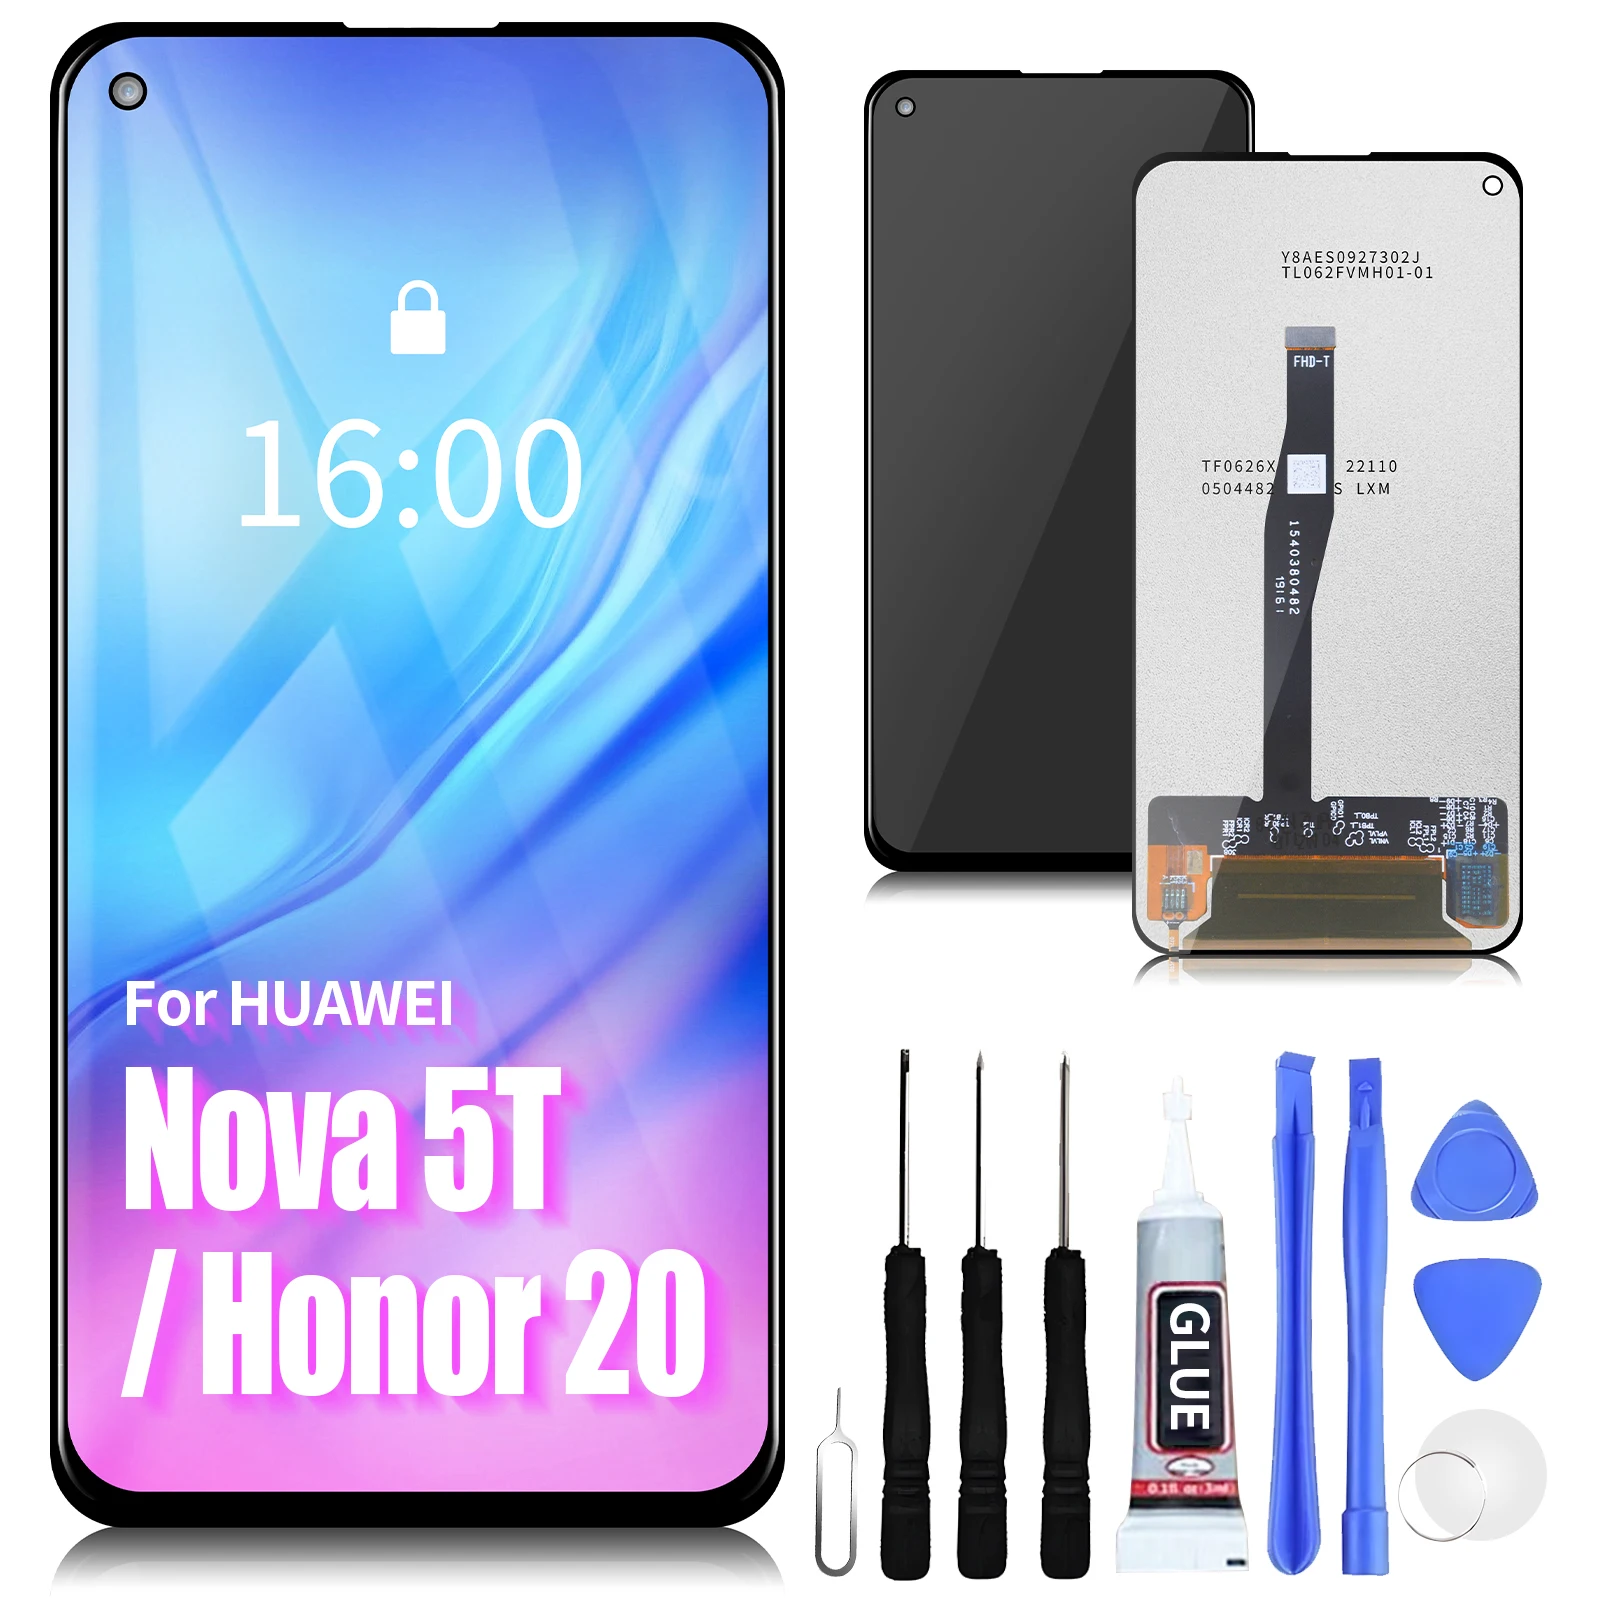 For HUAWEI Nova 5T 6.26'' For Original Honor 20 YAL-L21 L61 L71 L61D LCD Display Touch Screen Digitizer Phone Screen Replacement